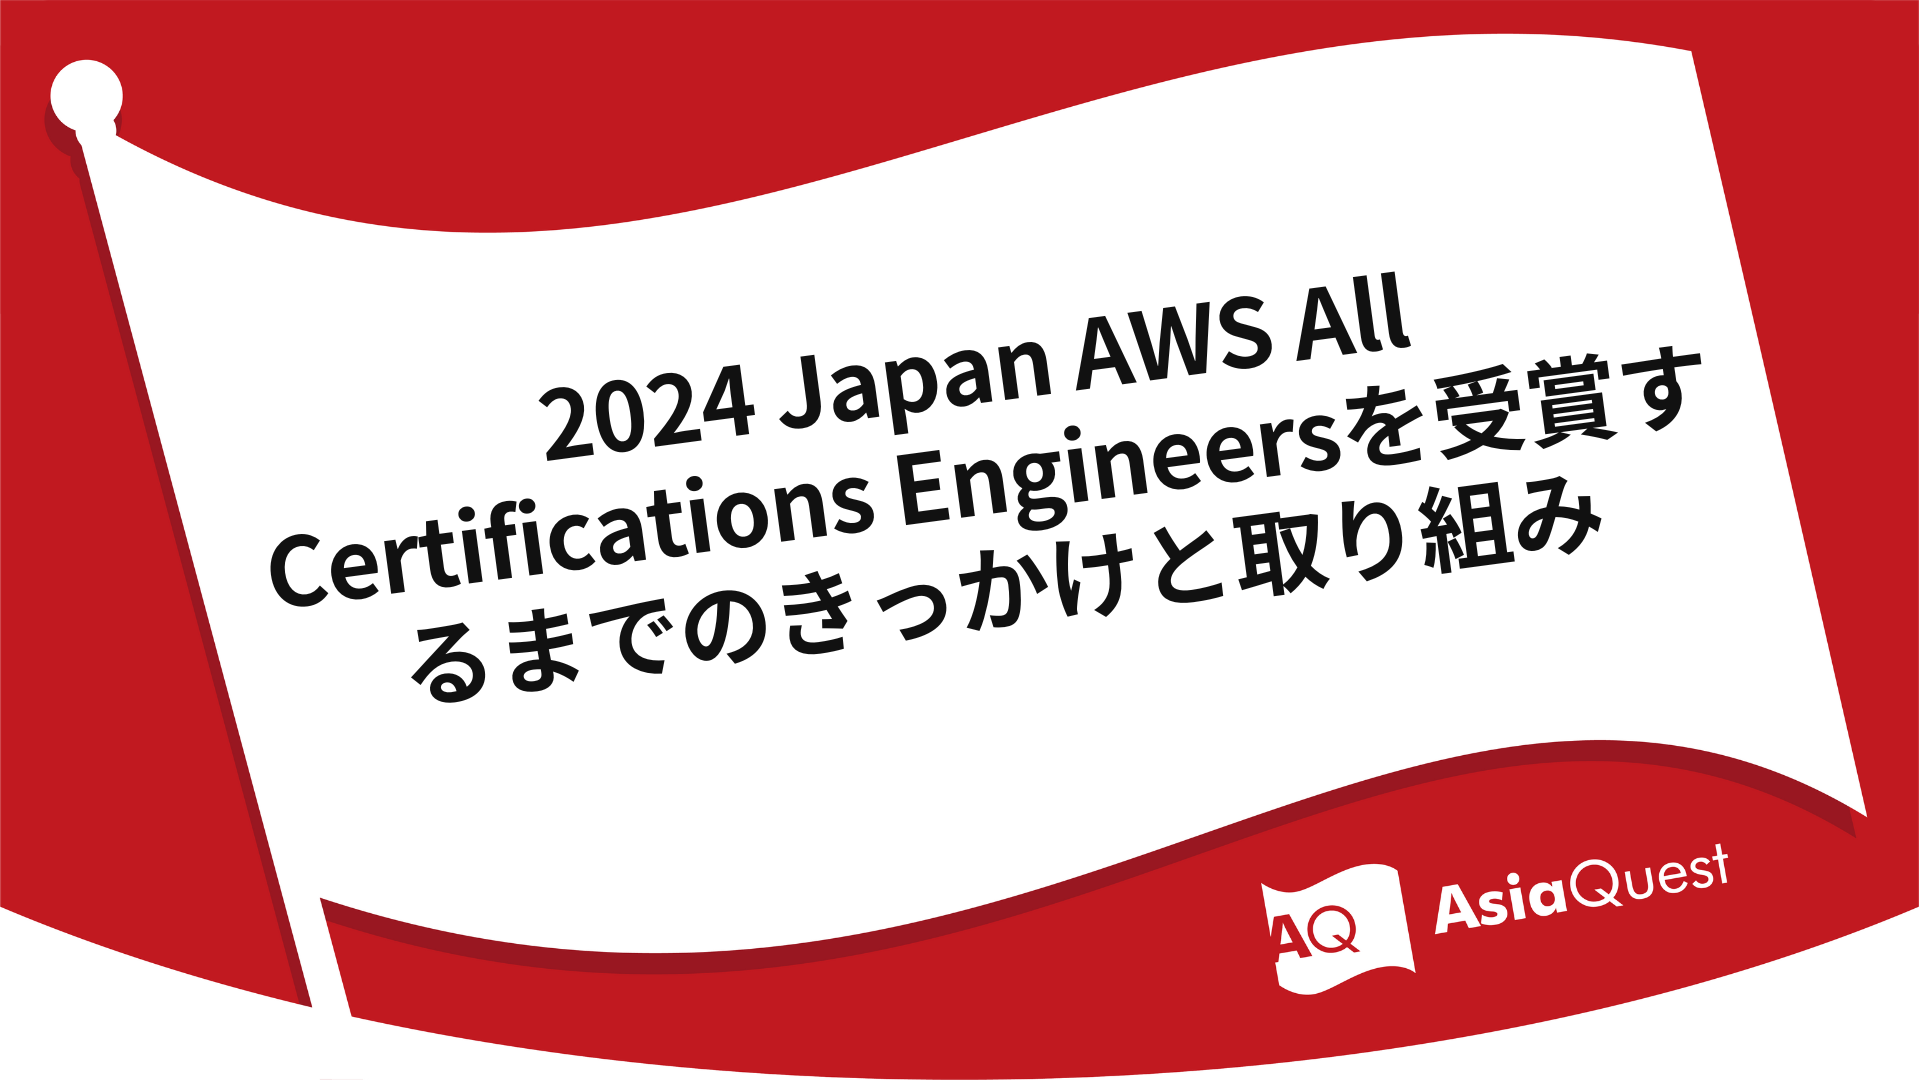 2024 Japan AWS All Certifications Engineersを受賞するまでのきっかけと取り組み